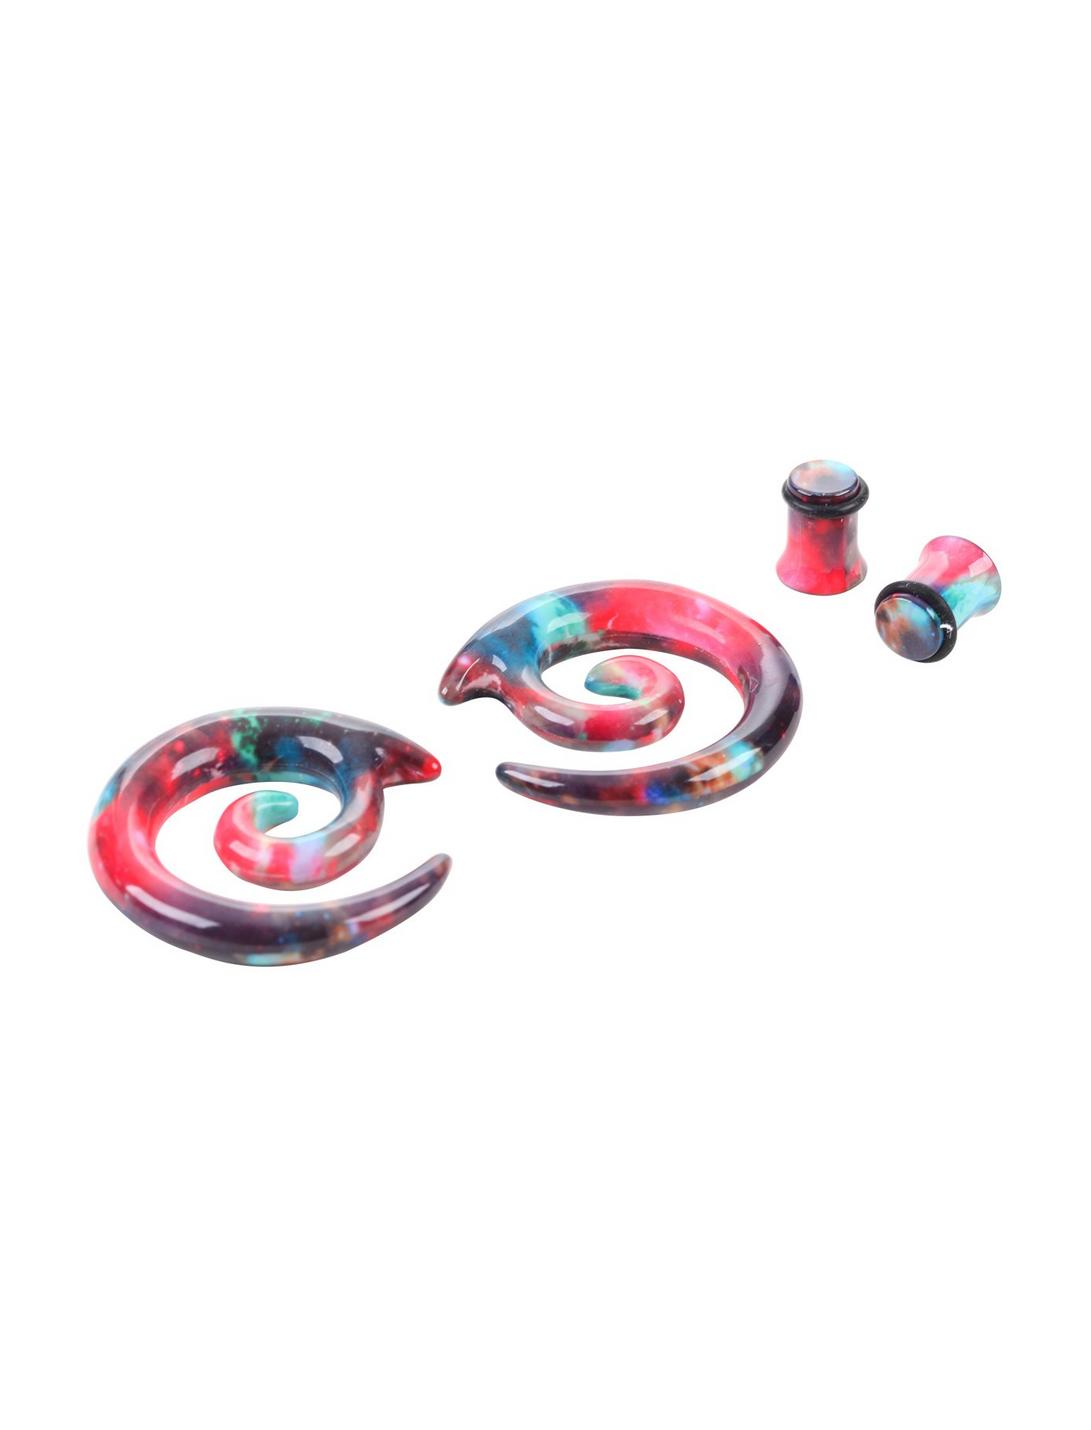 Acrylic Teal Candy Galaxy Spiral Pincher & Plug 4 Pack, , hi-res